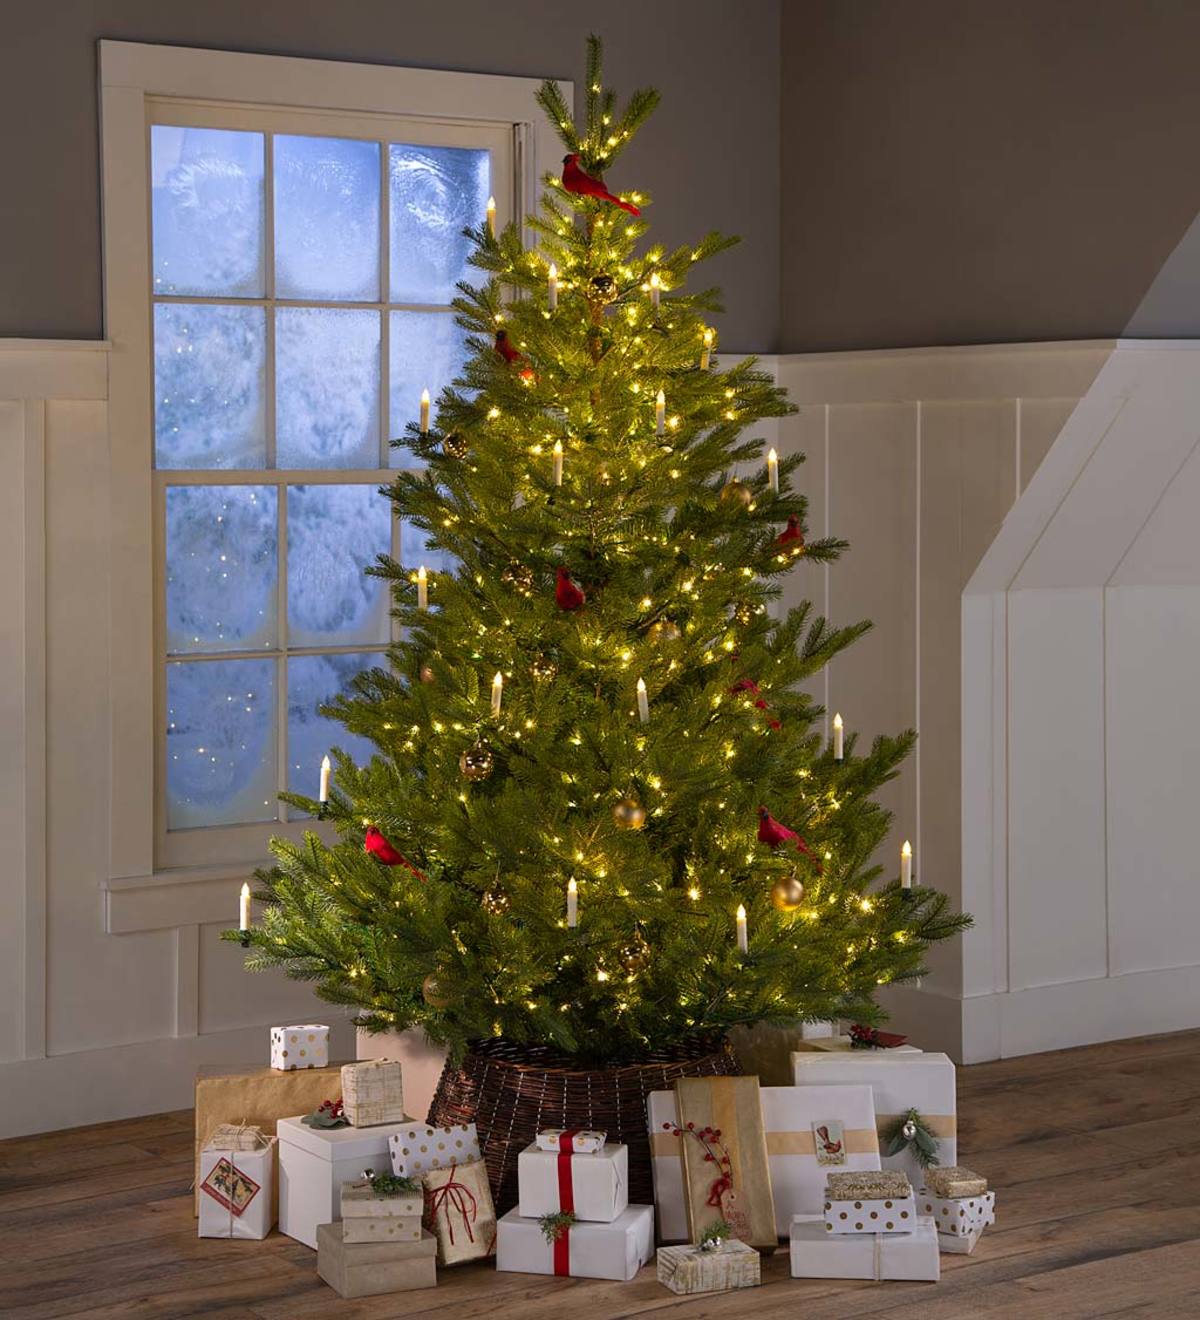 7' Arlberg Fir Christmas Tree | Eligible for Promotions | Collections ...